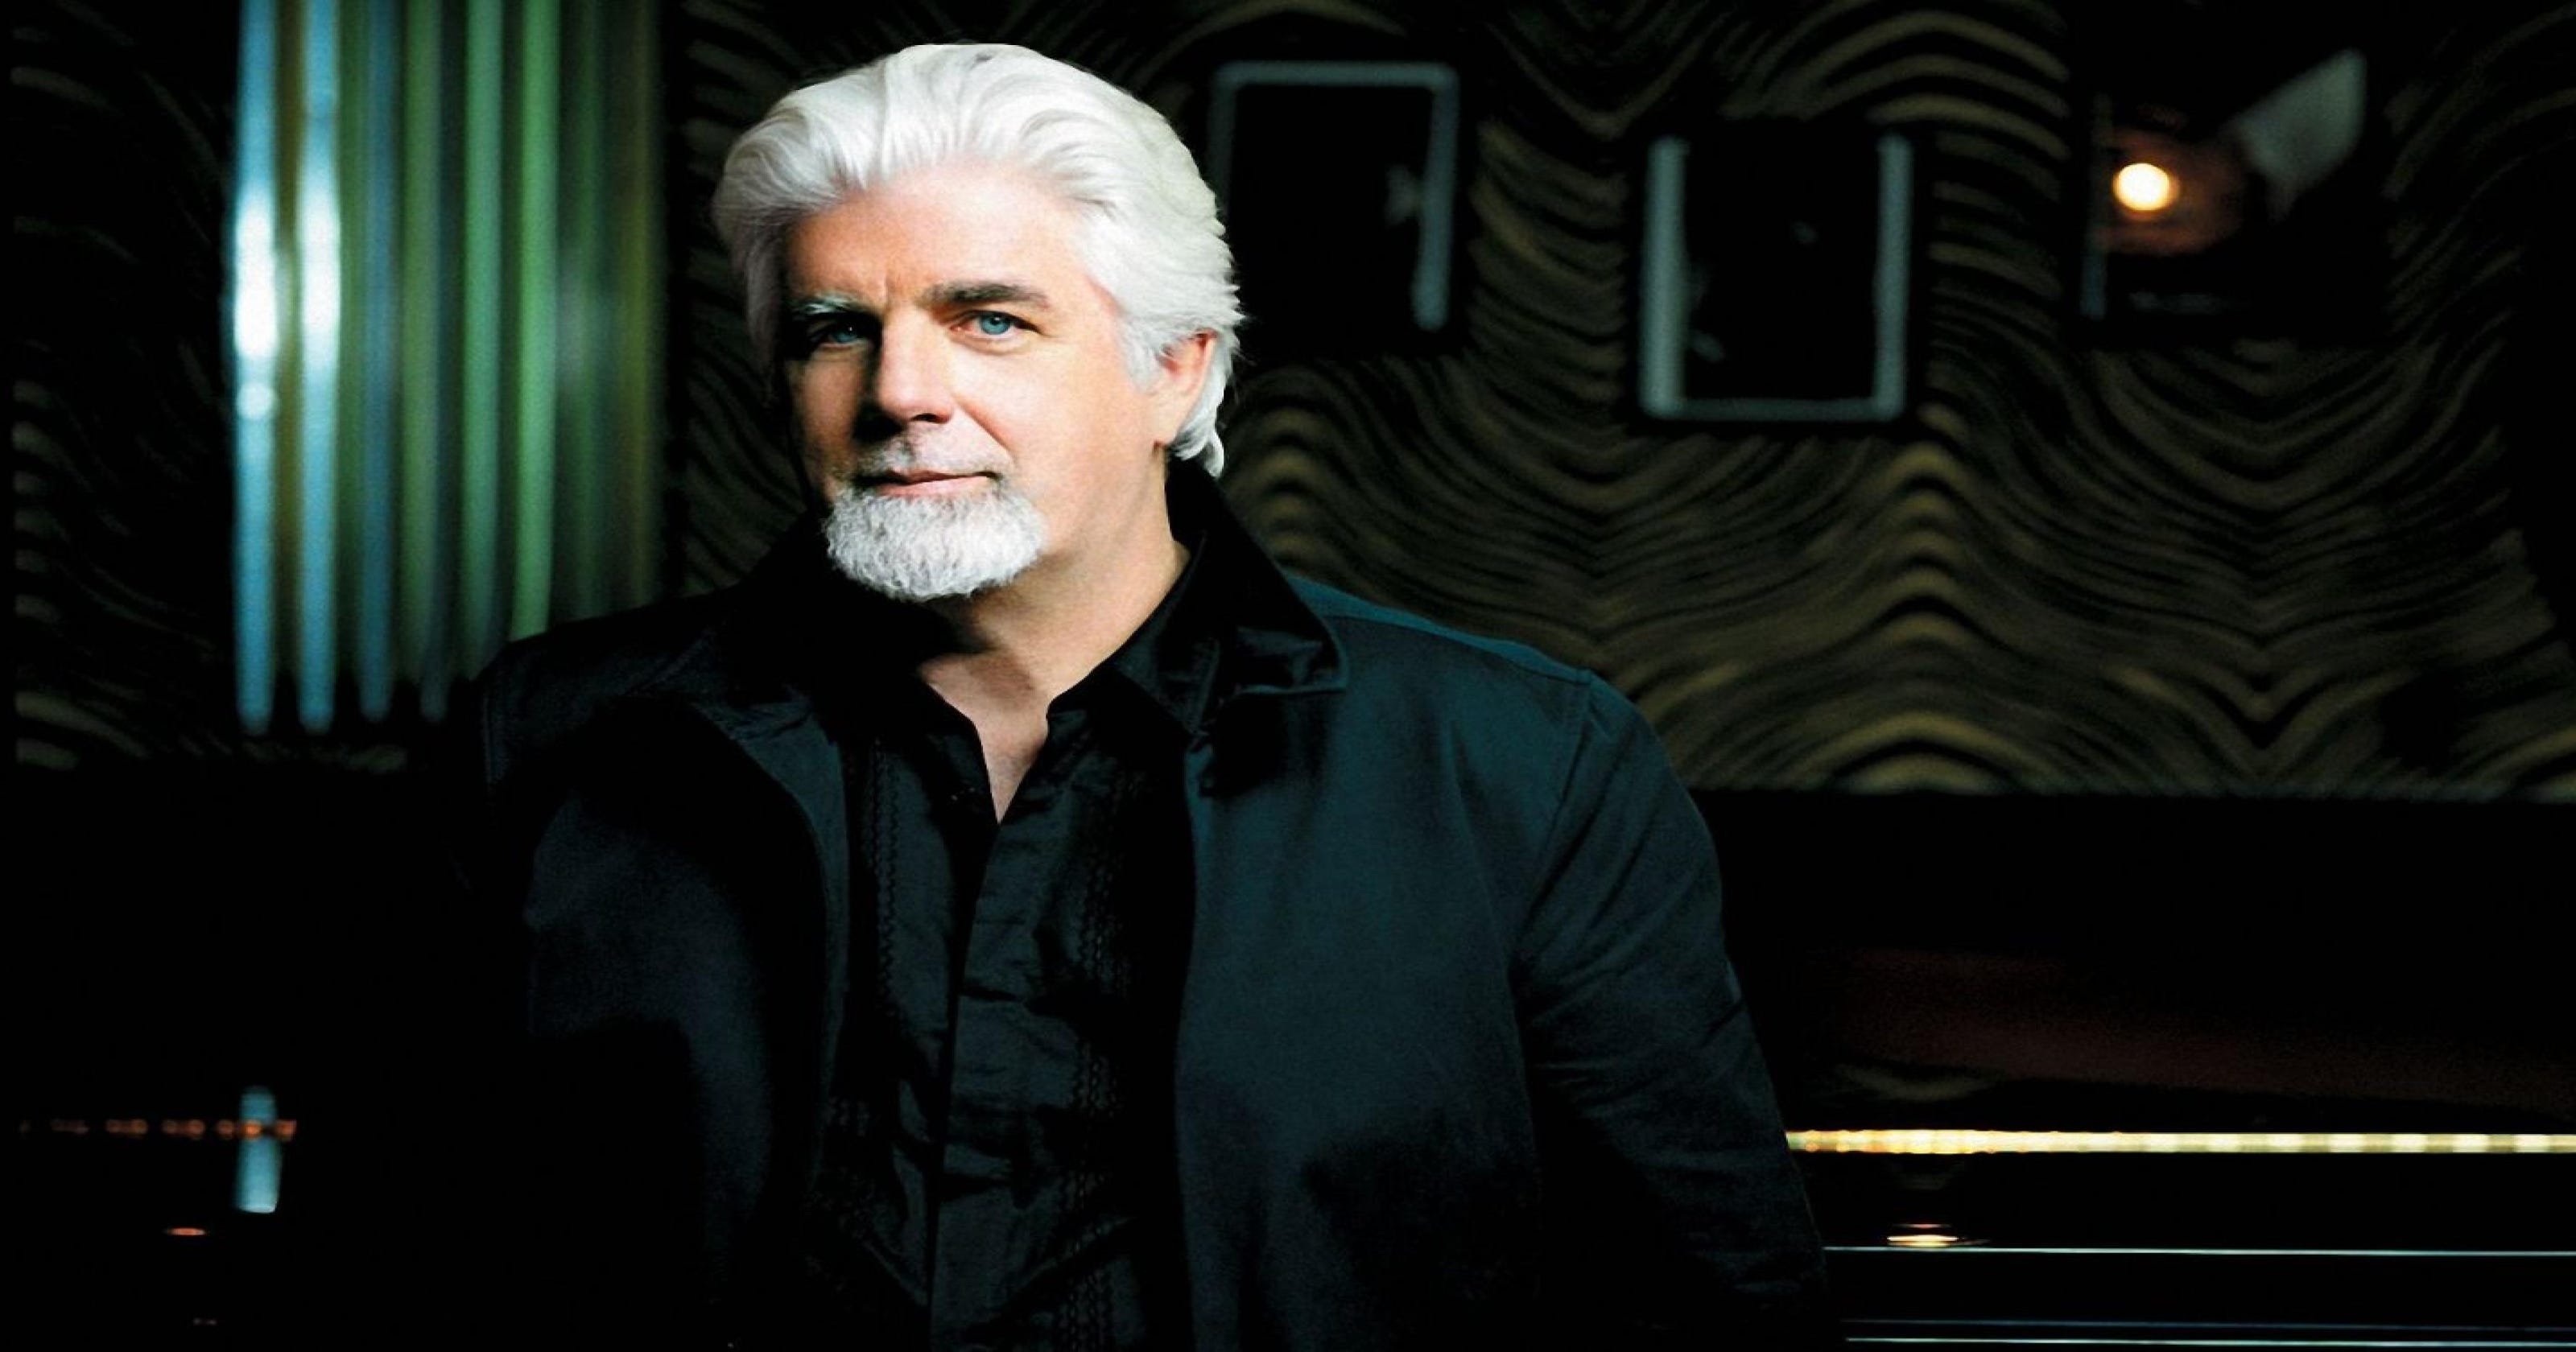 Michael McDonald, wife give a shout out to Palisades ...